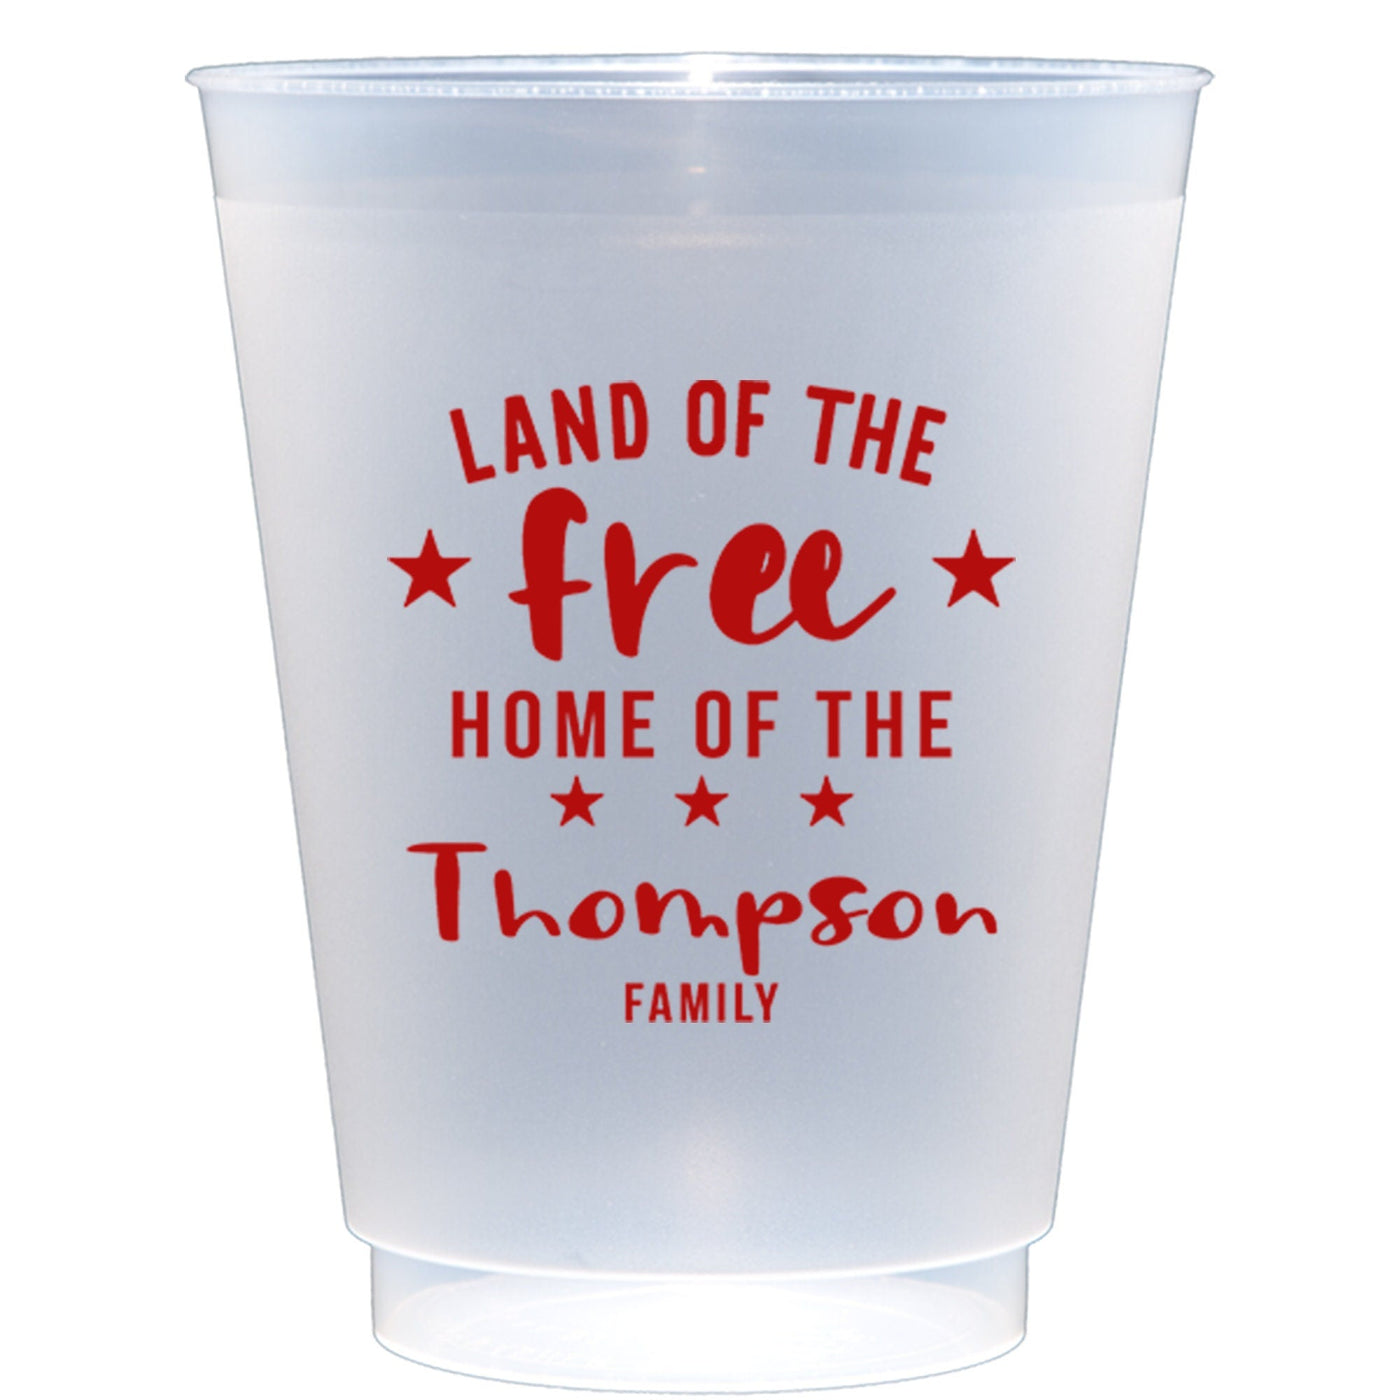 Merica 4th of July Memorial Day Patriotic Party Frost Flex Shatterproof Cups - JJ's Party House